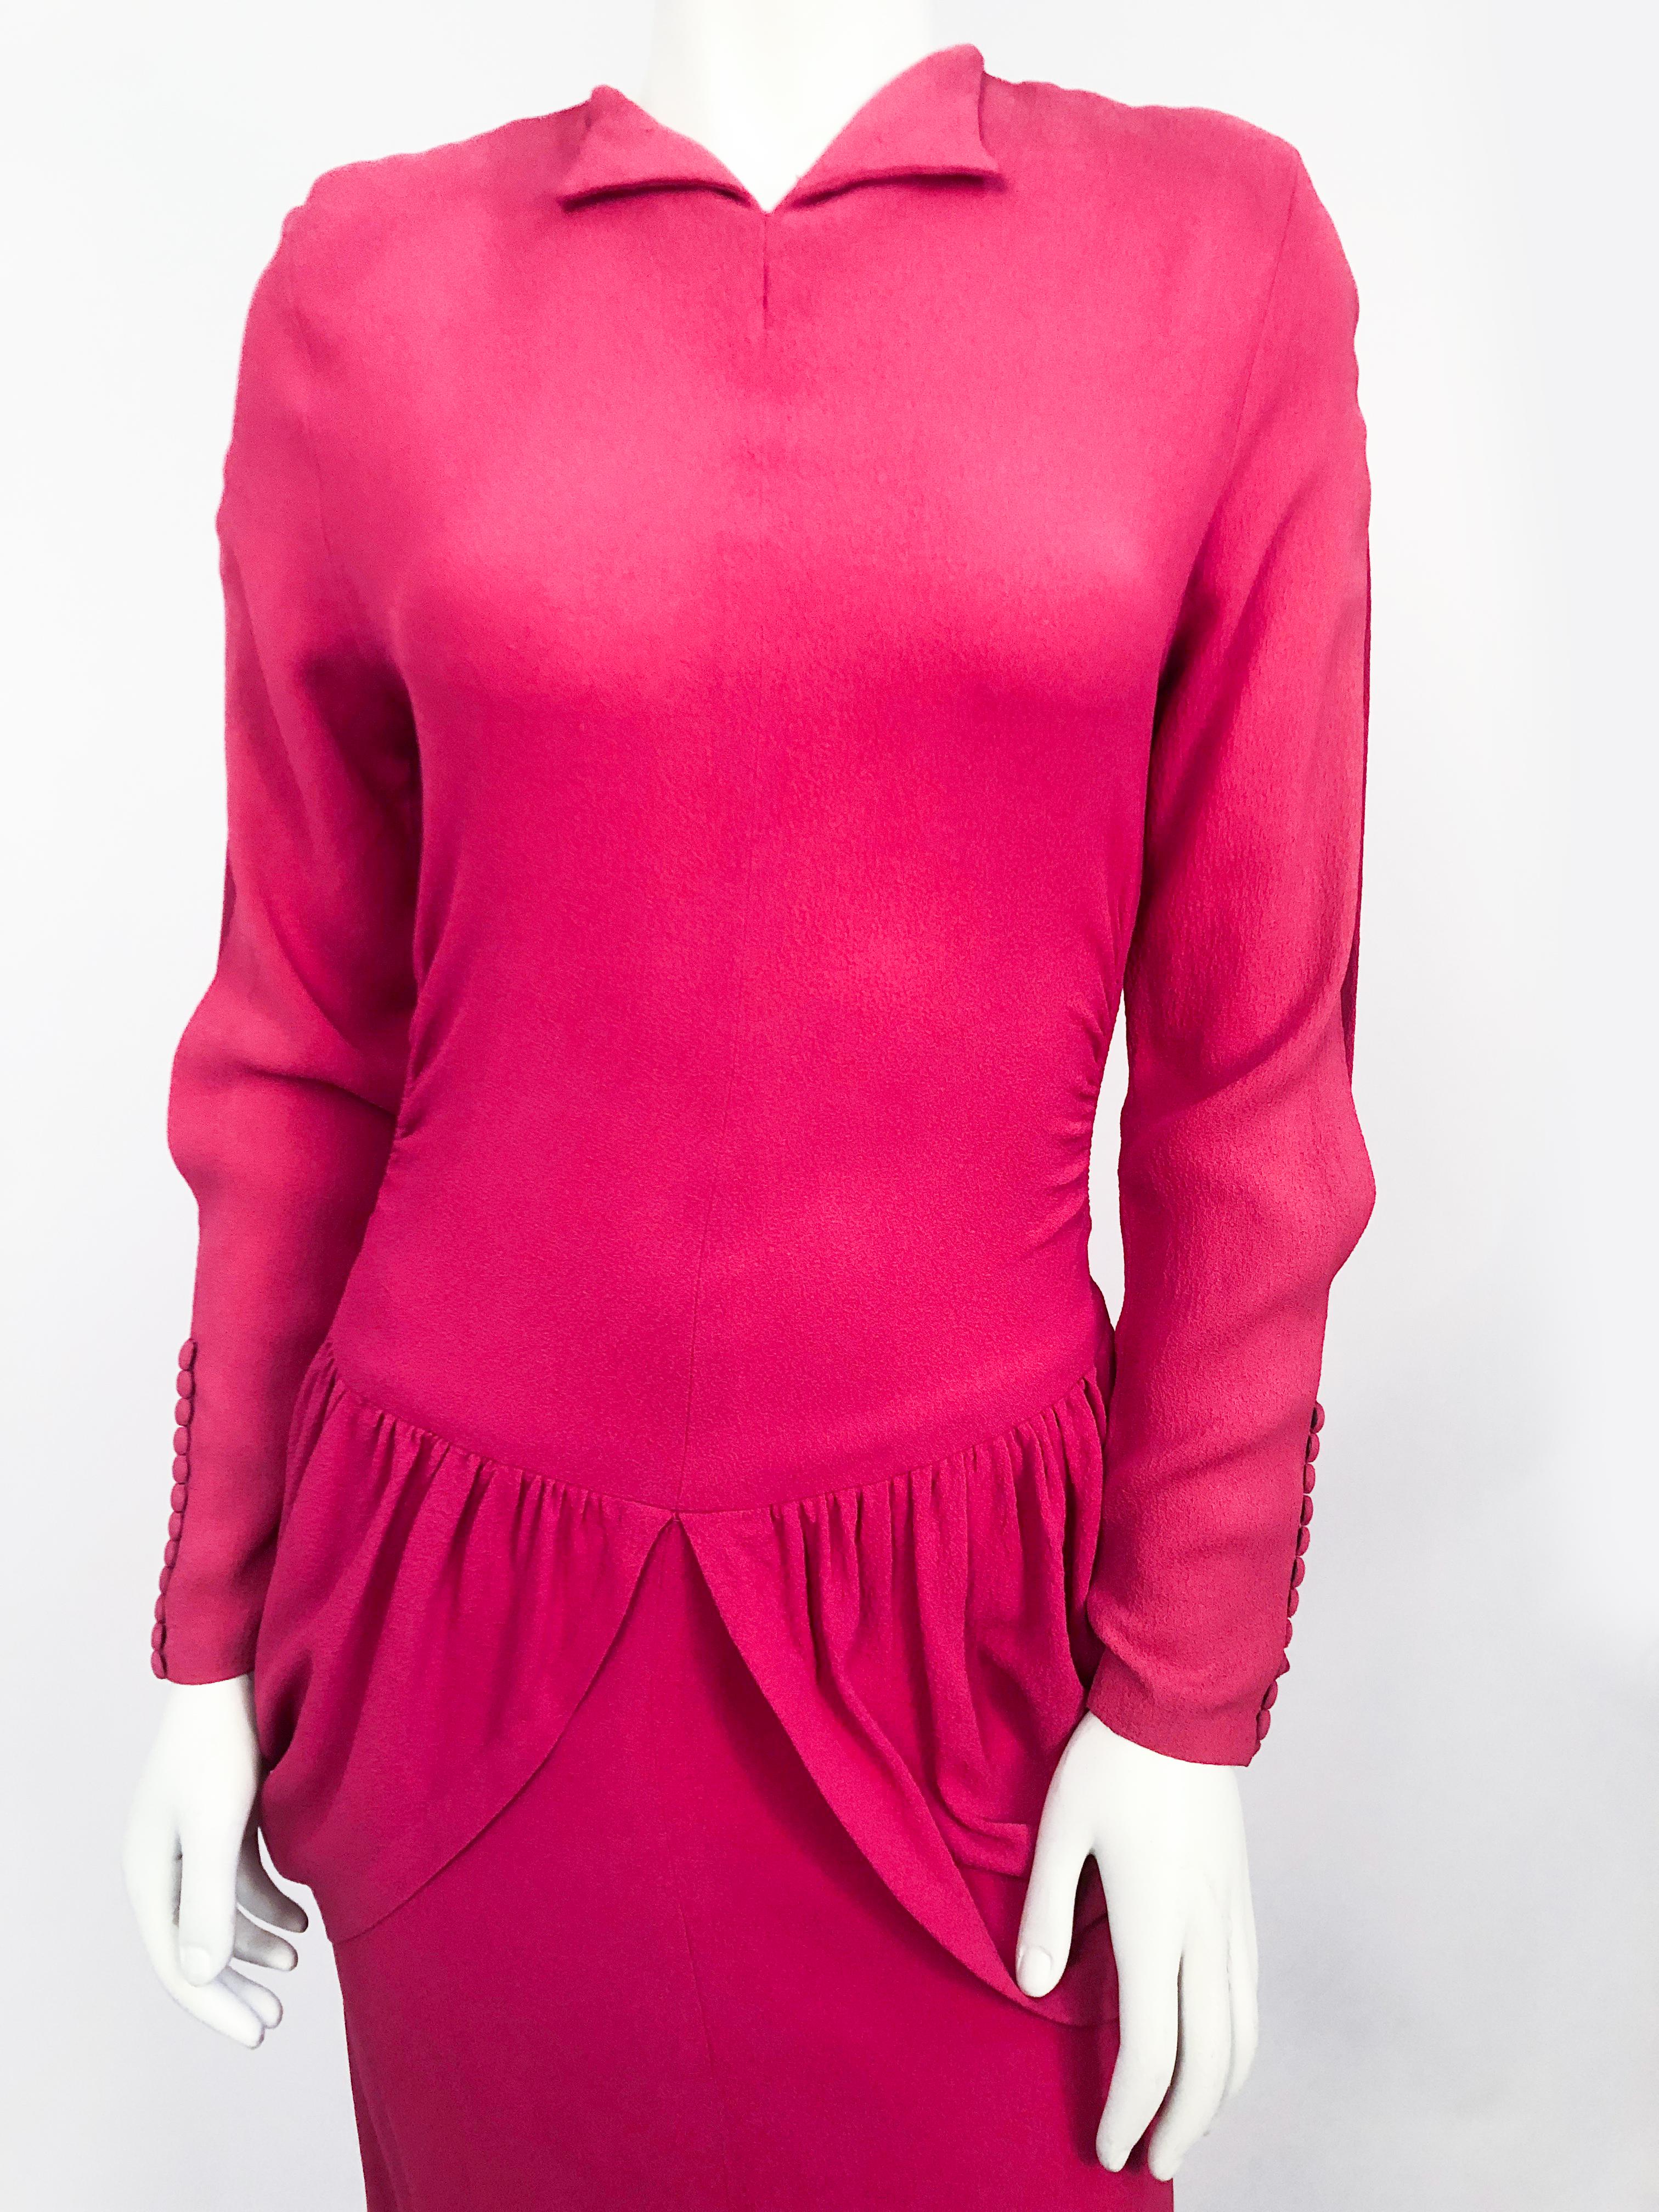 1940s Hot Pink Dress with Flounces and Draped Panels on the hip. Also has sleeve slits, folded collar, modified peplum in the back and slight high-low hem.